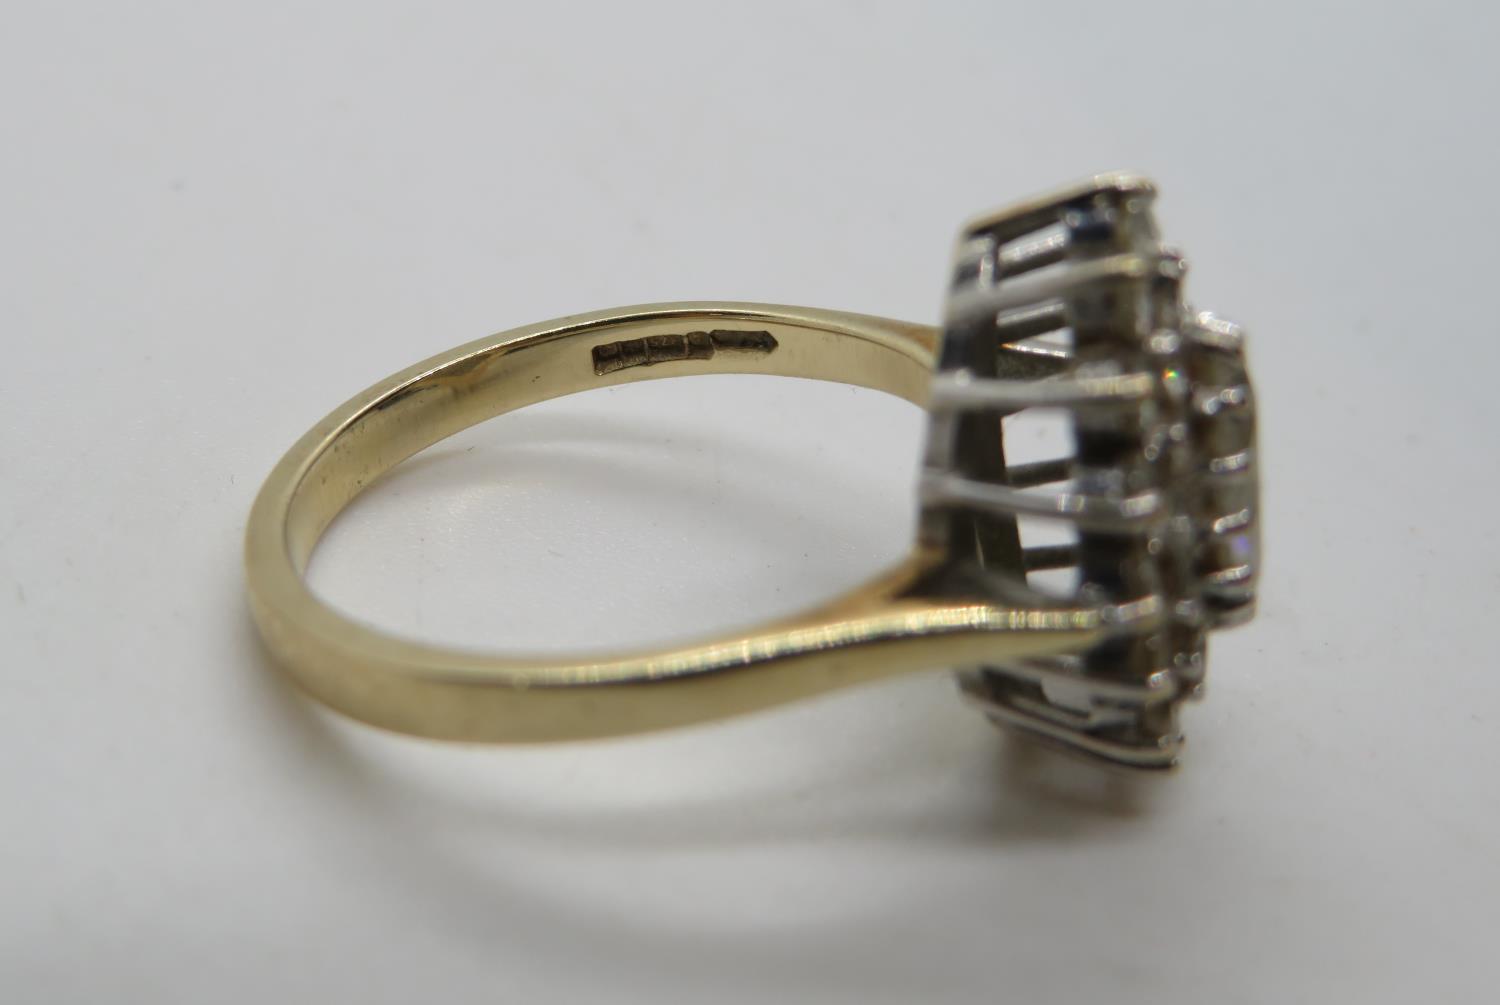 4g size P gold and CZ ring - Image 3 of 3